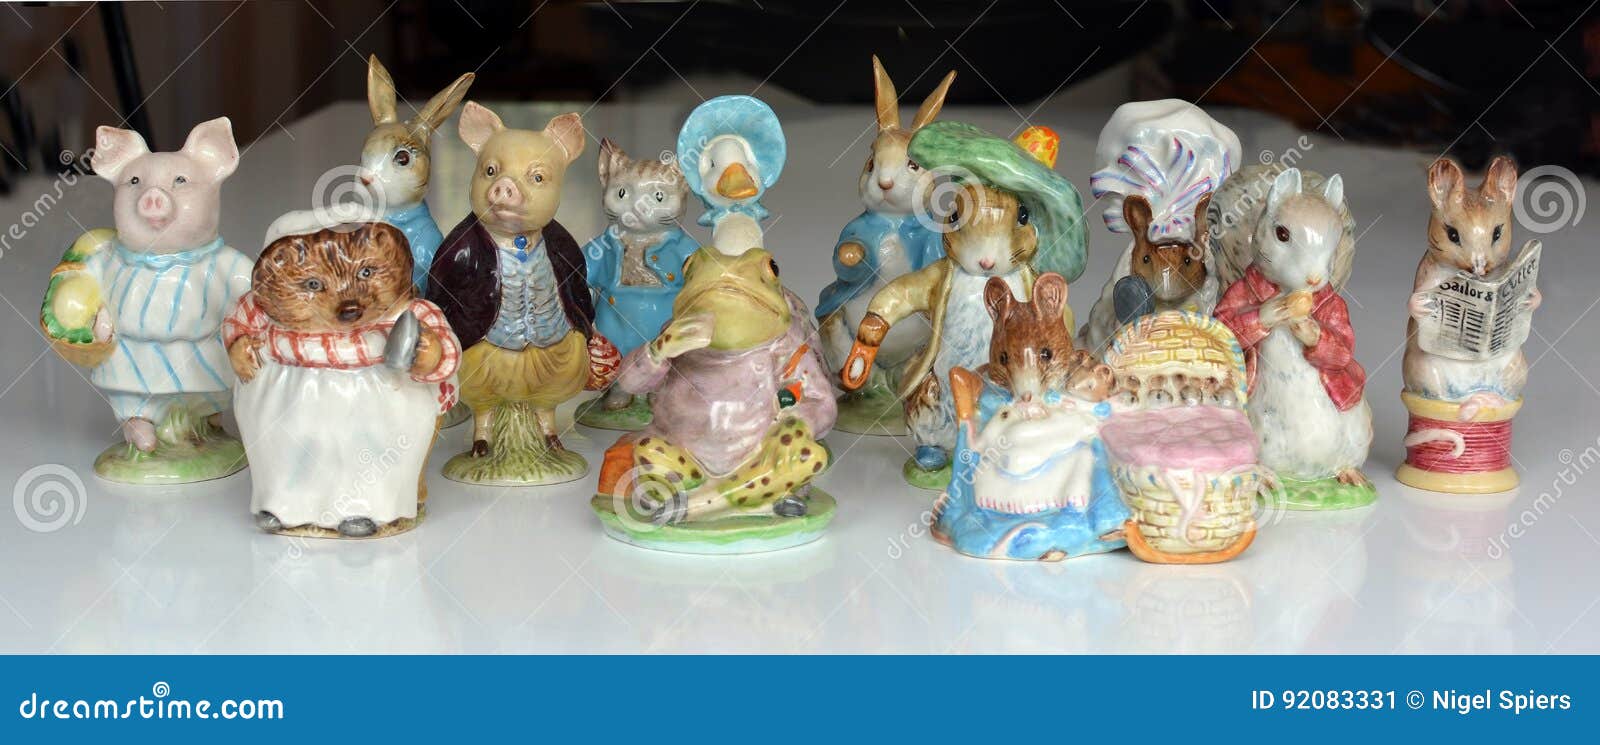 collection of collectable beswick beatrix potter figurines.